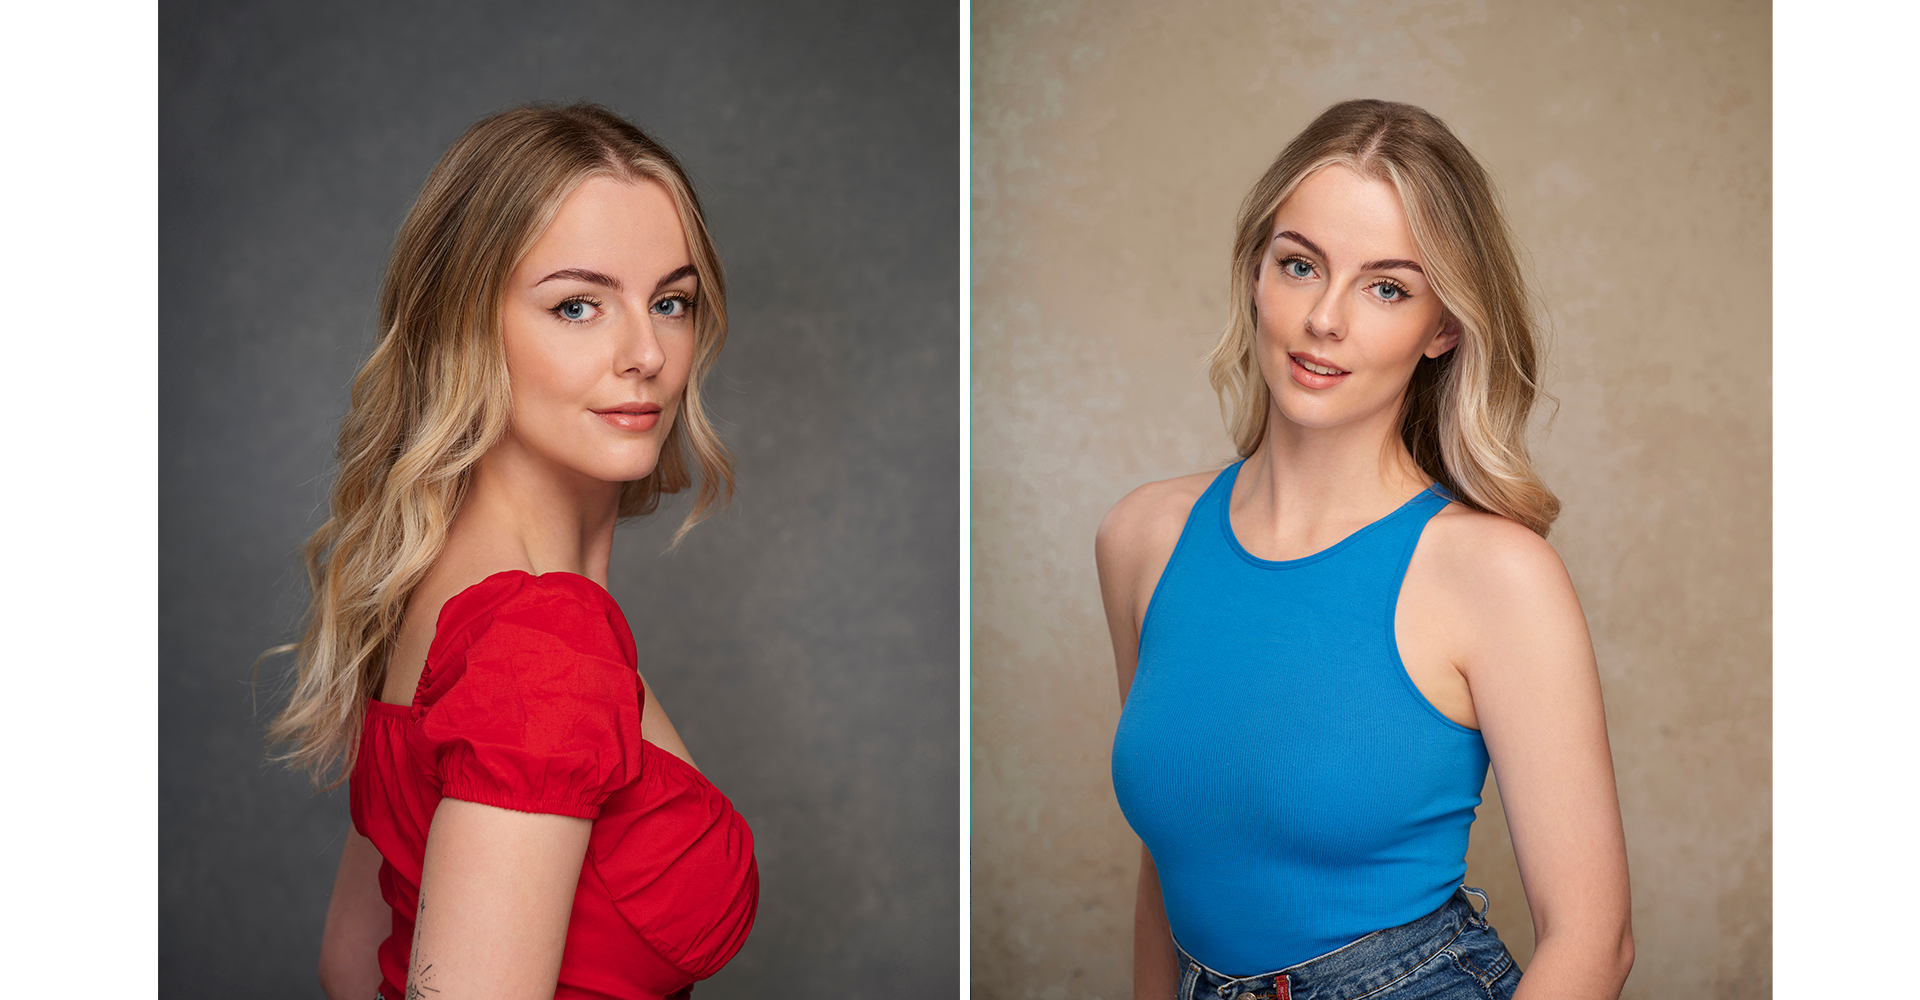 blonde actress singer head shot front of a canvas painted backdrop wearing a red and blue top